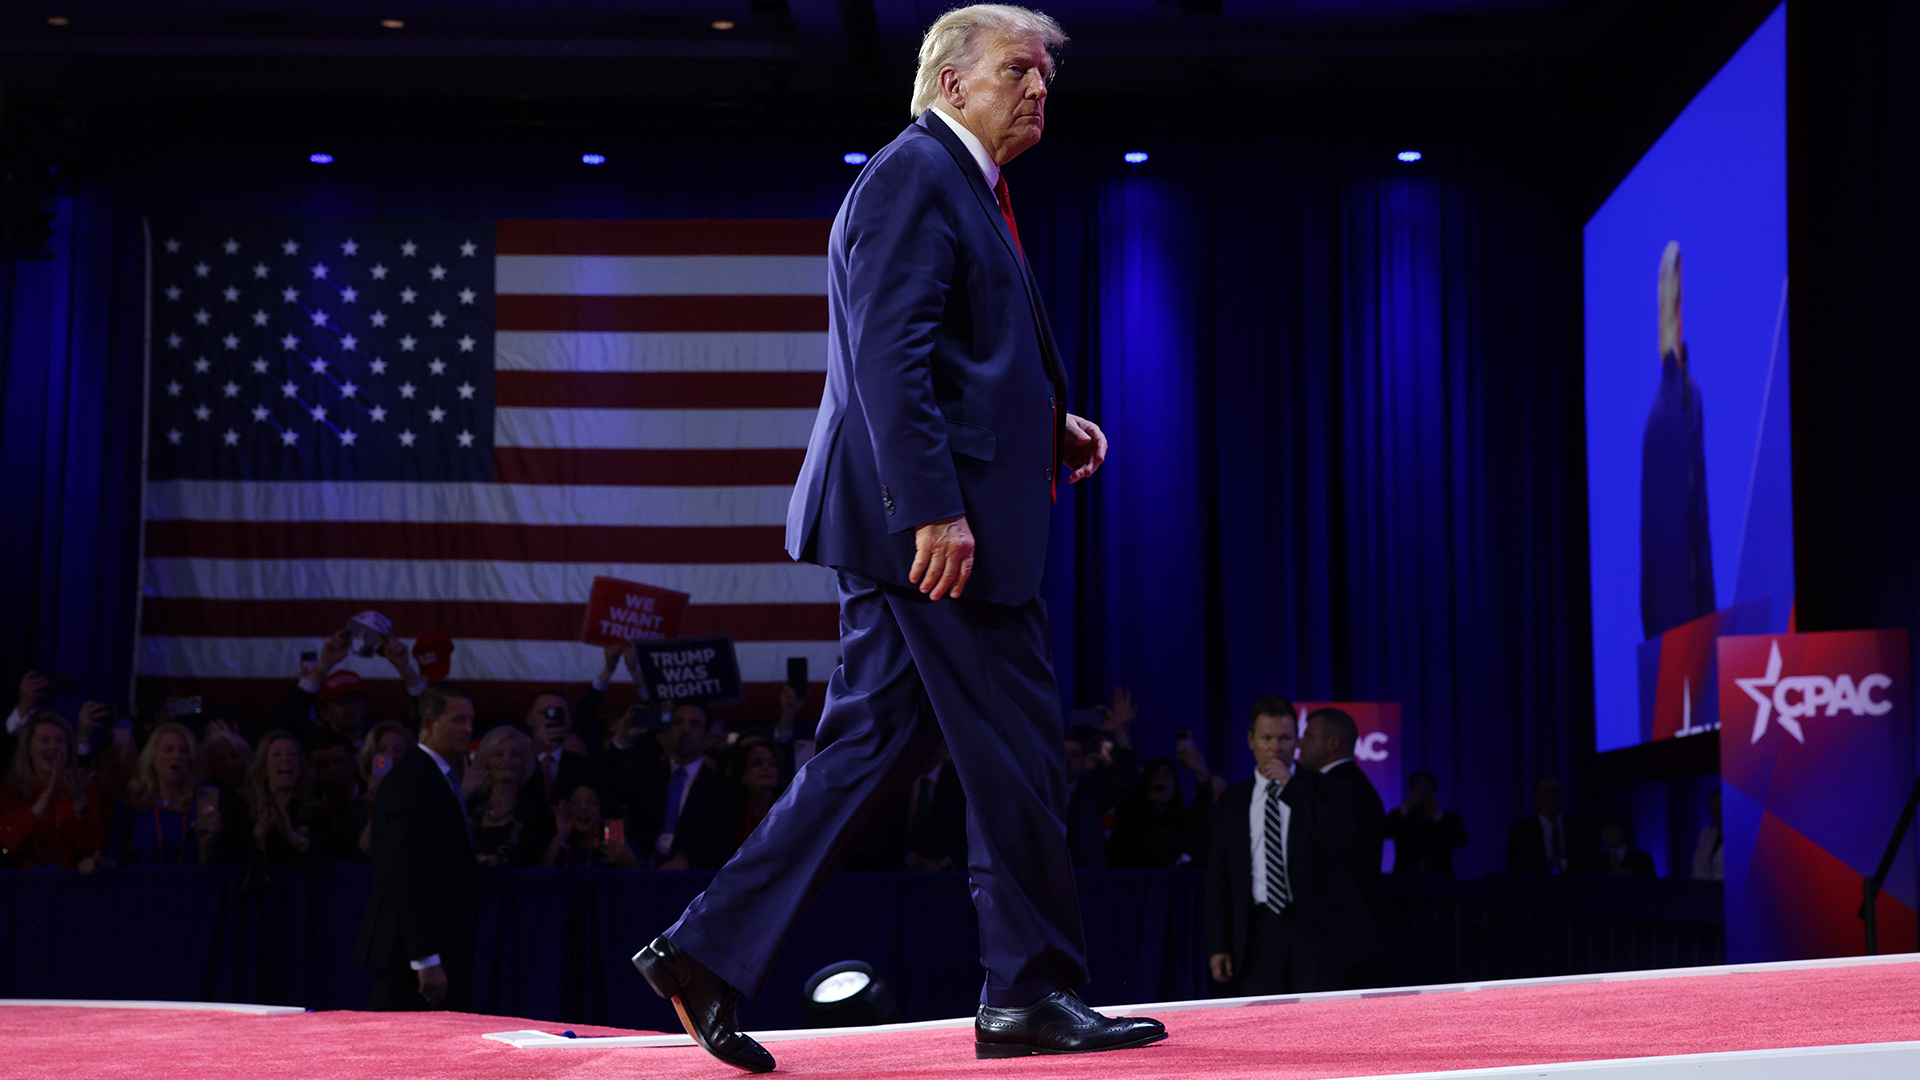 Former President Donald Trump leaves after he addressed the annual Conservative Political Action Conference at Gaylord National Resort & Convention Center on March 4 in National Harbor, Maryland.